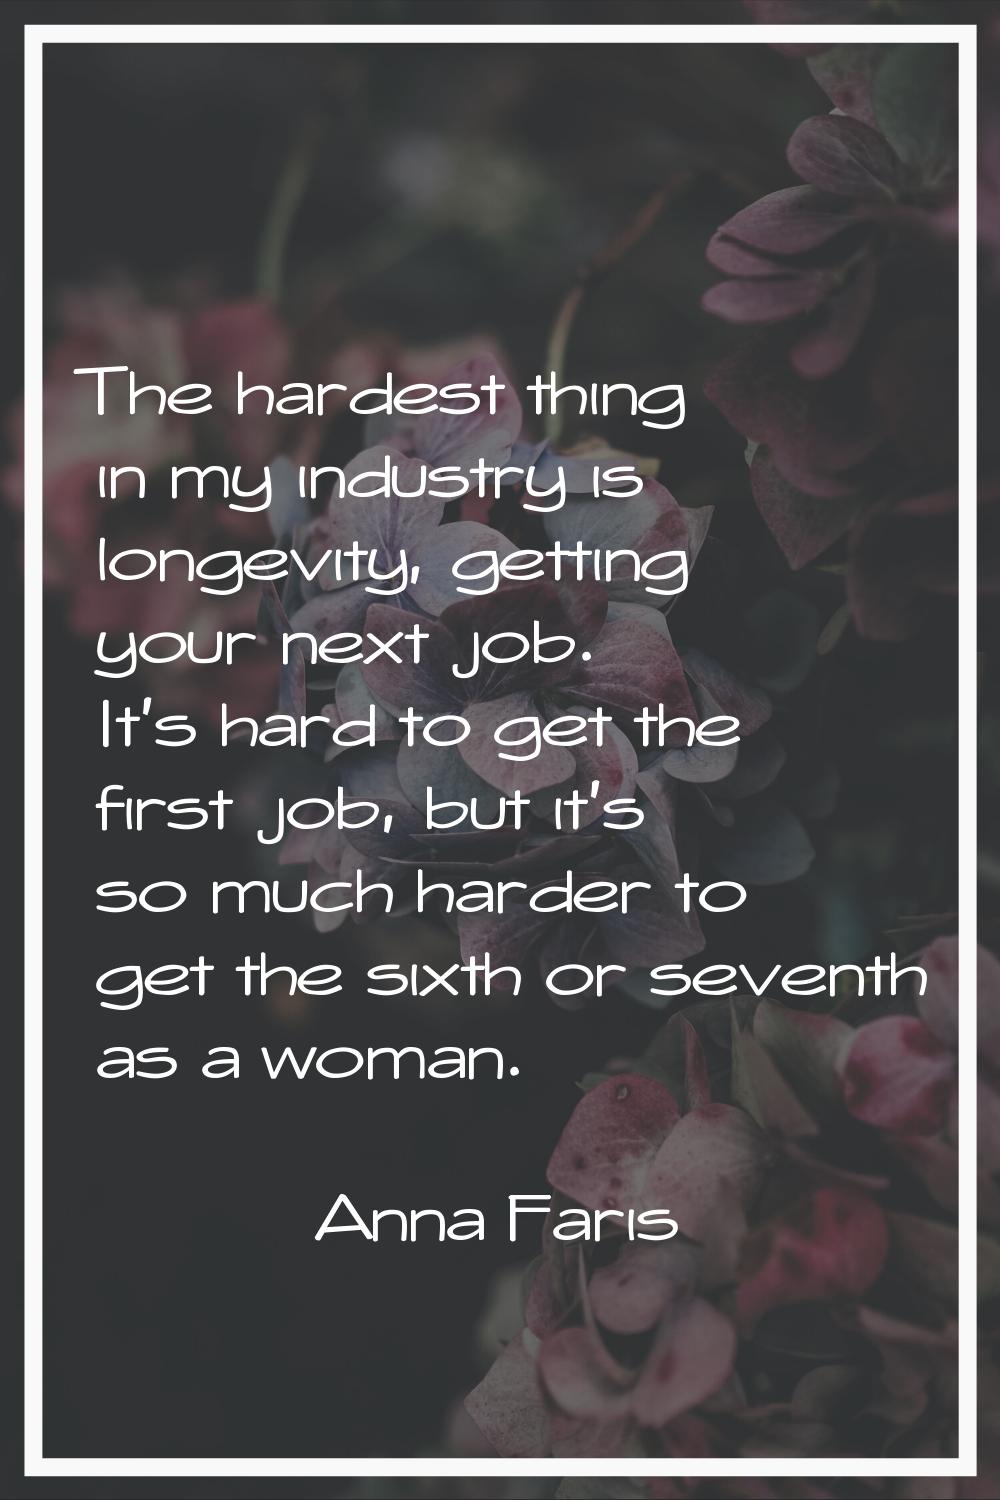 The hardest thing in my industry is longevity, getting your next job. It's hard to get the first jo